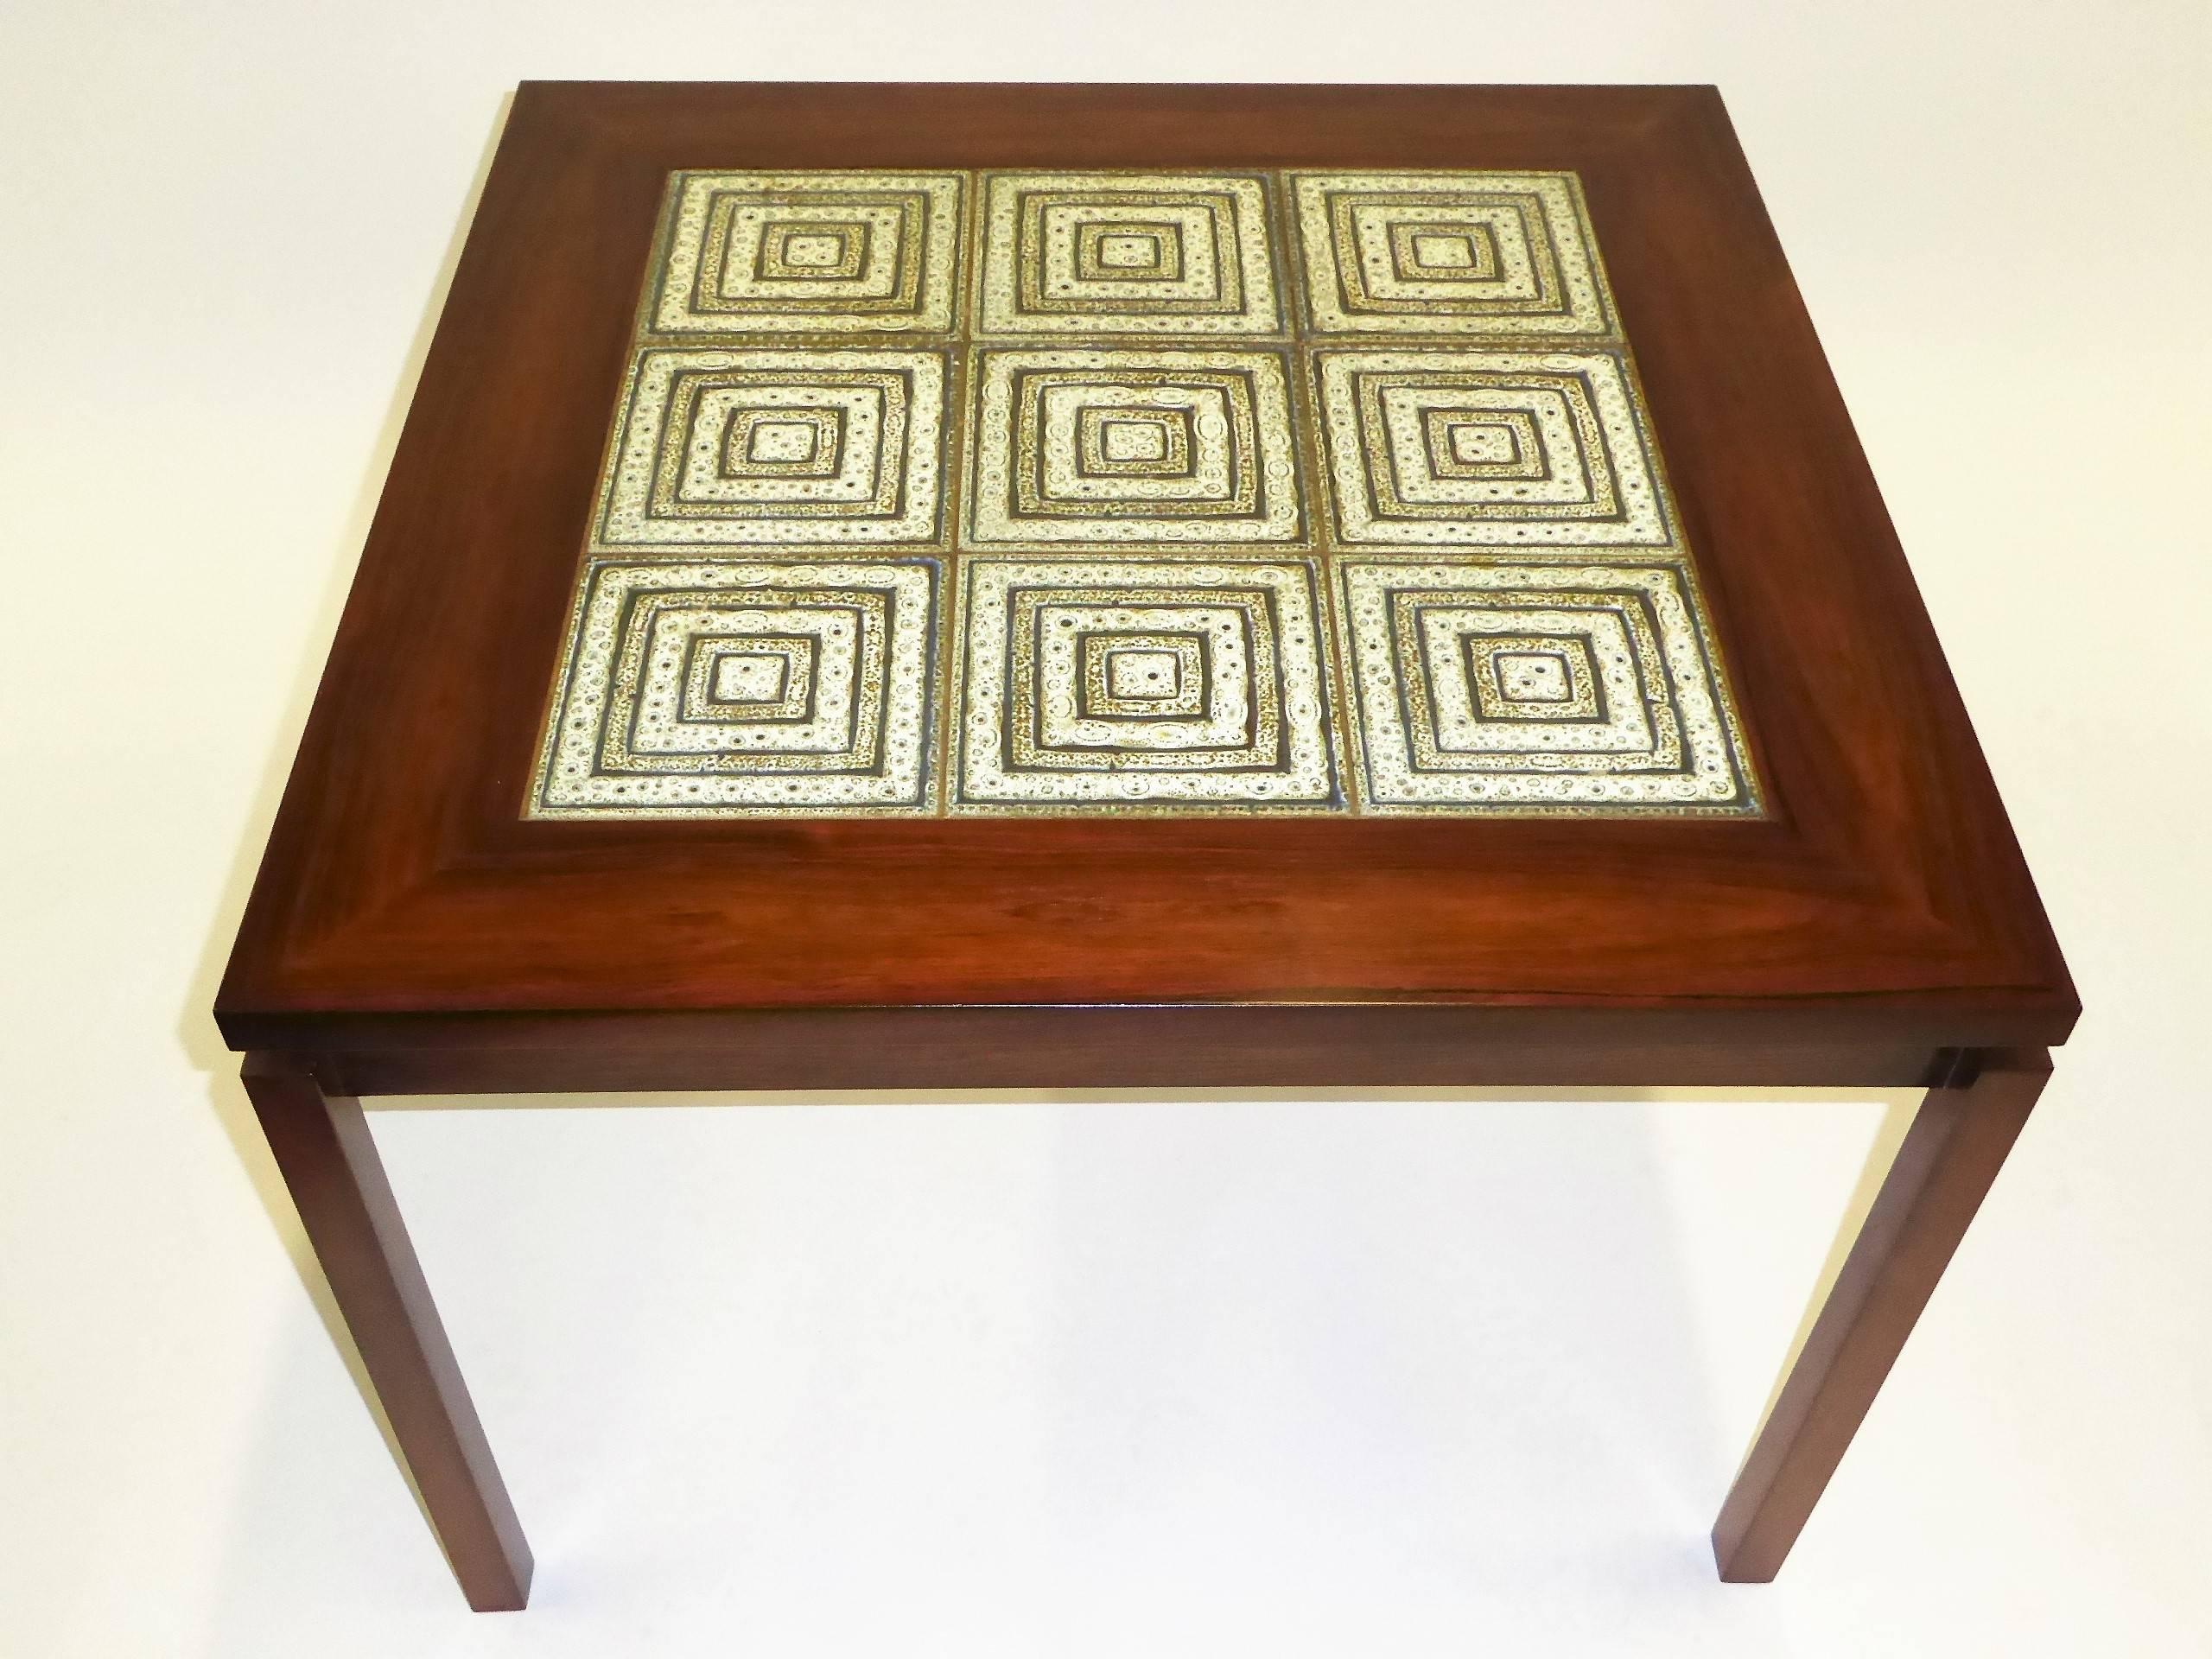 Beautifully figured Rosewood highlights this table as well as the centered Nils Thorsson tiles, probably Royal Copenhagen. Cantilevered positioned legs add to its charm, extending out from the apron frieze, the top overhanging like an eave. Restored